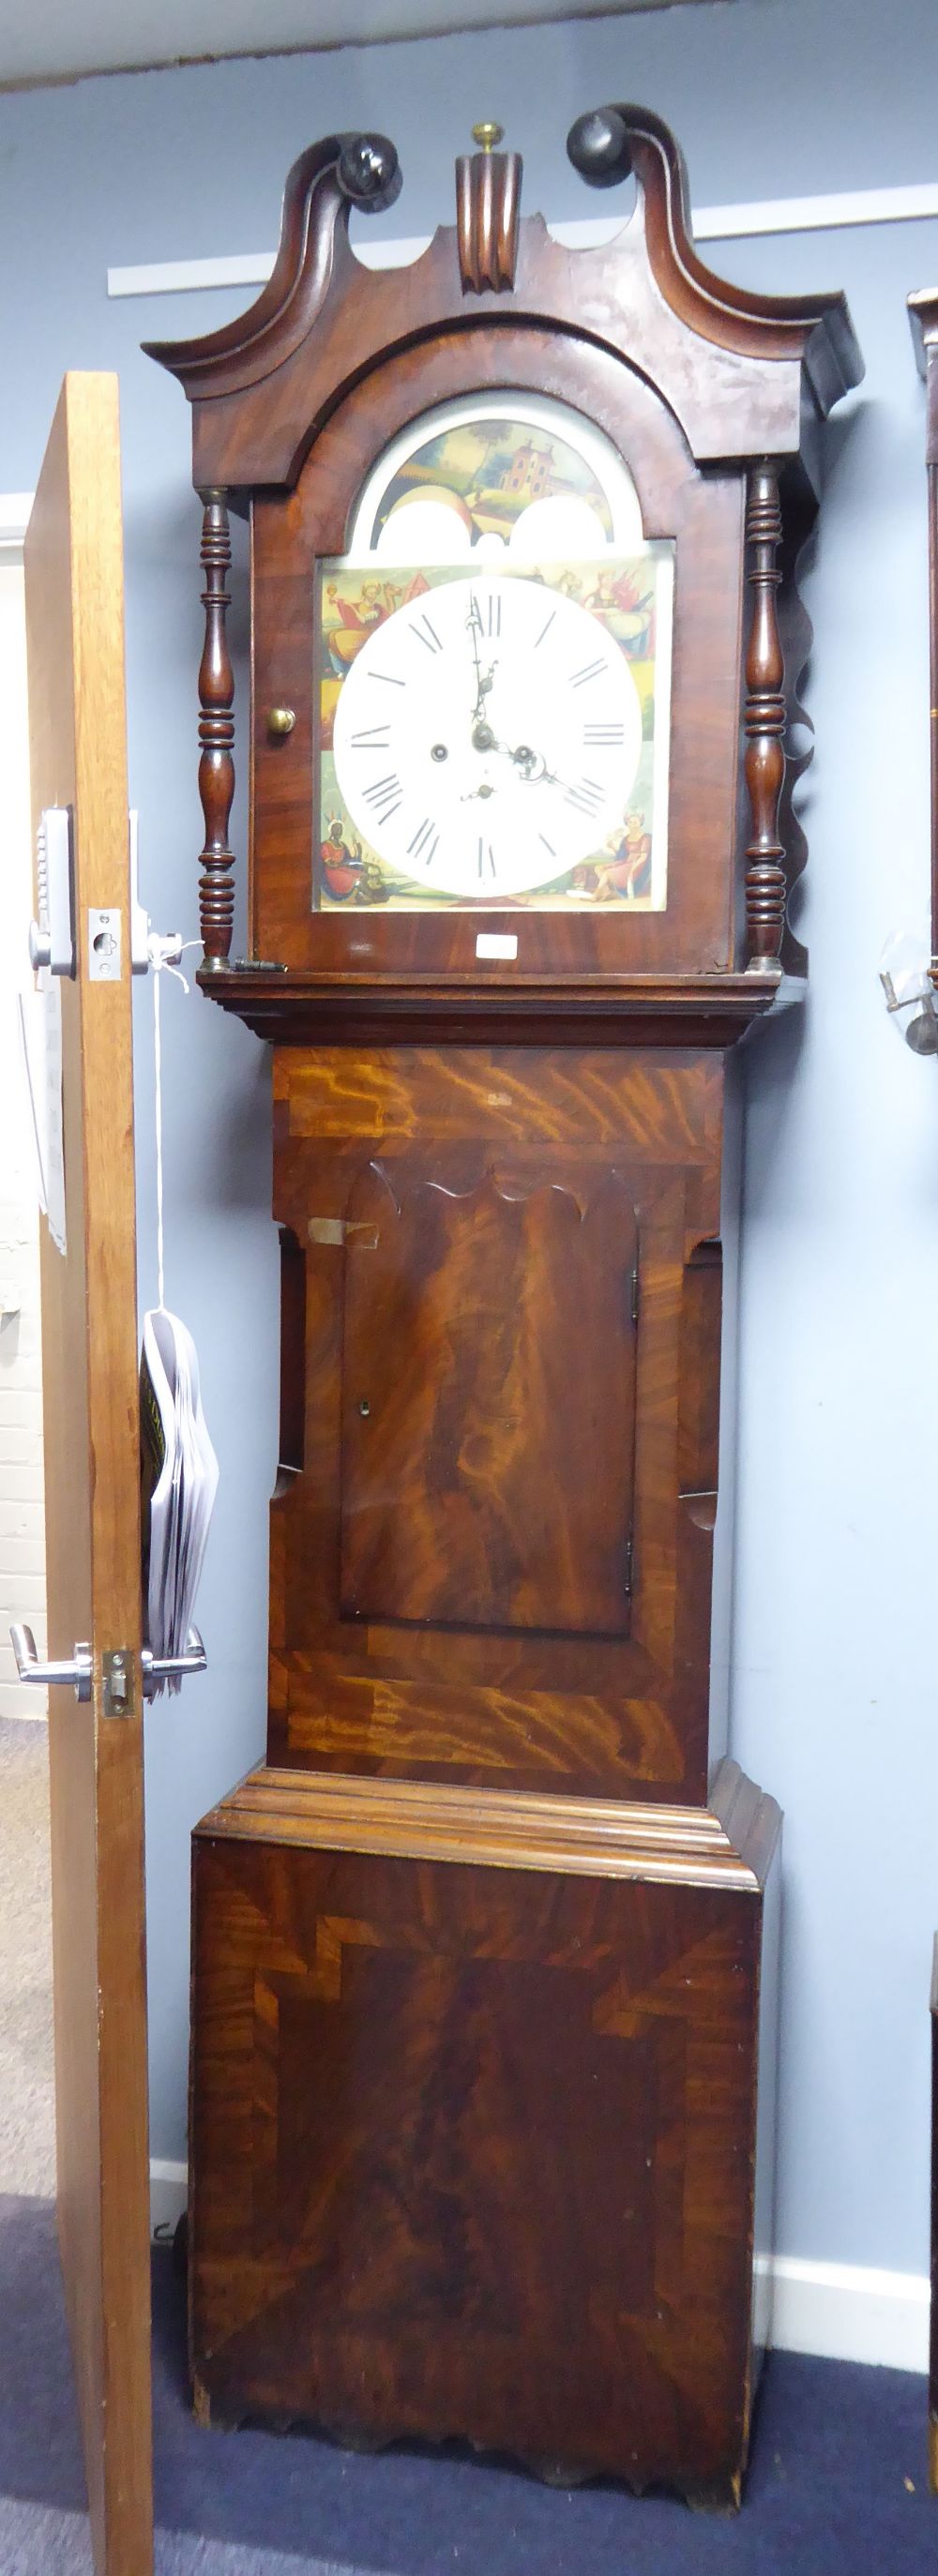 NINETEENTH CENTURY FIGURED MAHOGANY LONGCASE CLOCK WITH ROLLING MOON PHASE, the 14" painted dial - Image 2 of 2